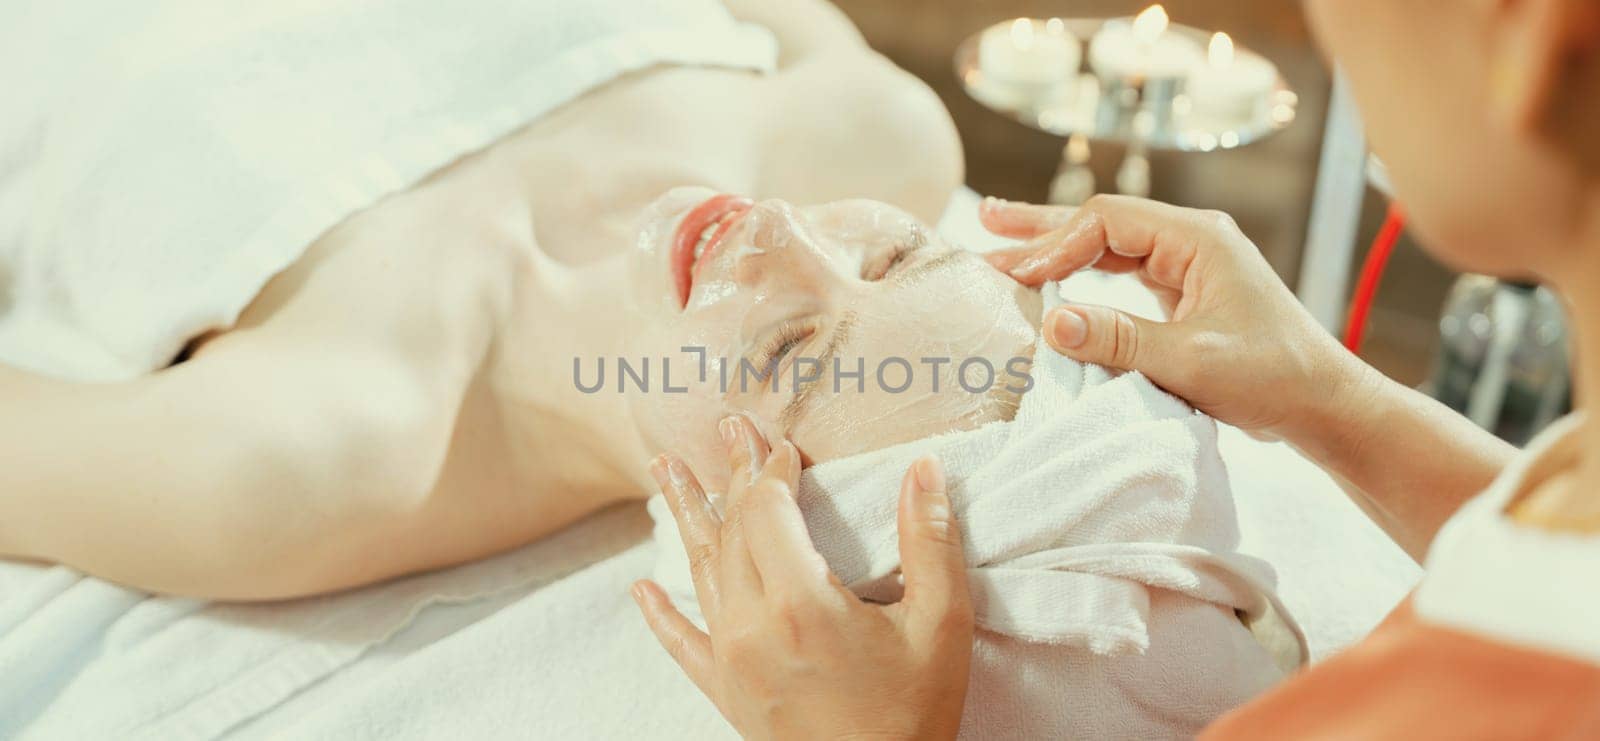 Portrait of beautiful caucasian woman having facial massage with homemade facial mask while lies on spa bed surrounded by beauty electrical equipment and peaceful nature environment. Tranquility.